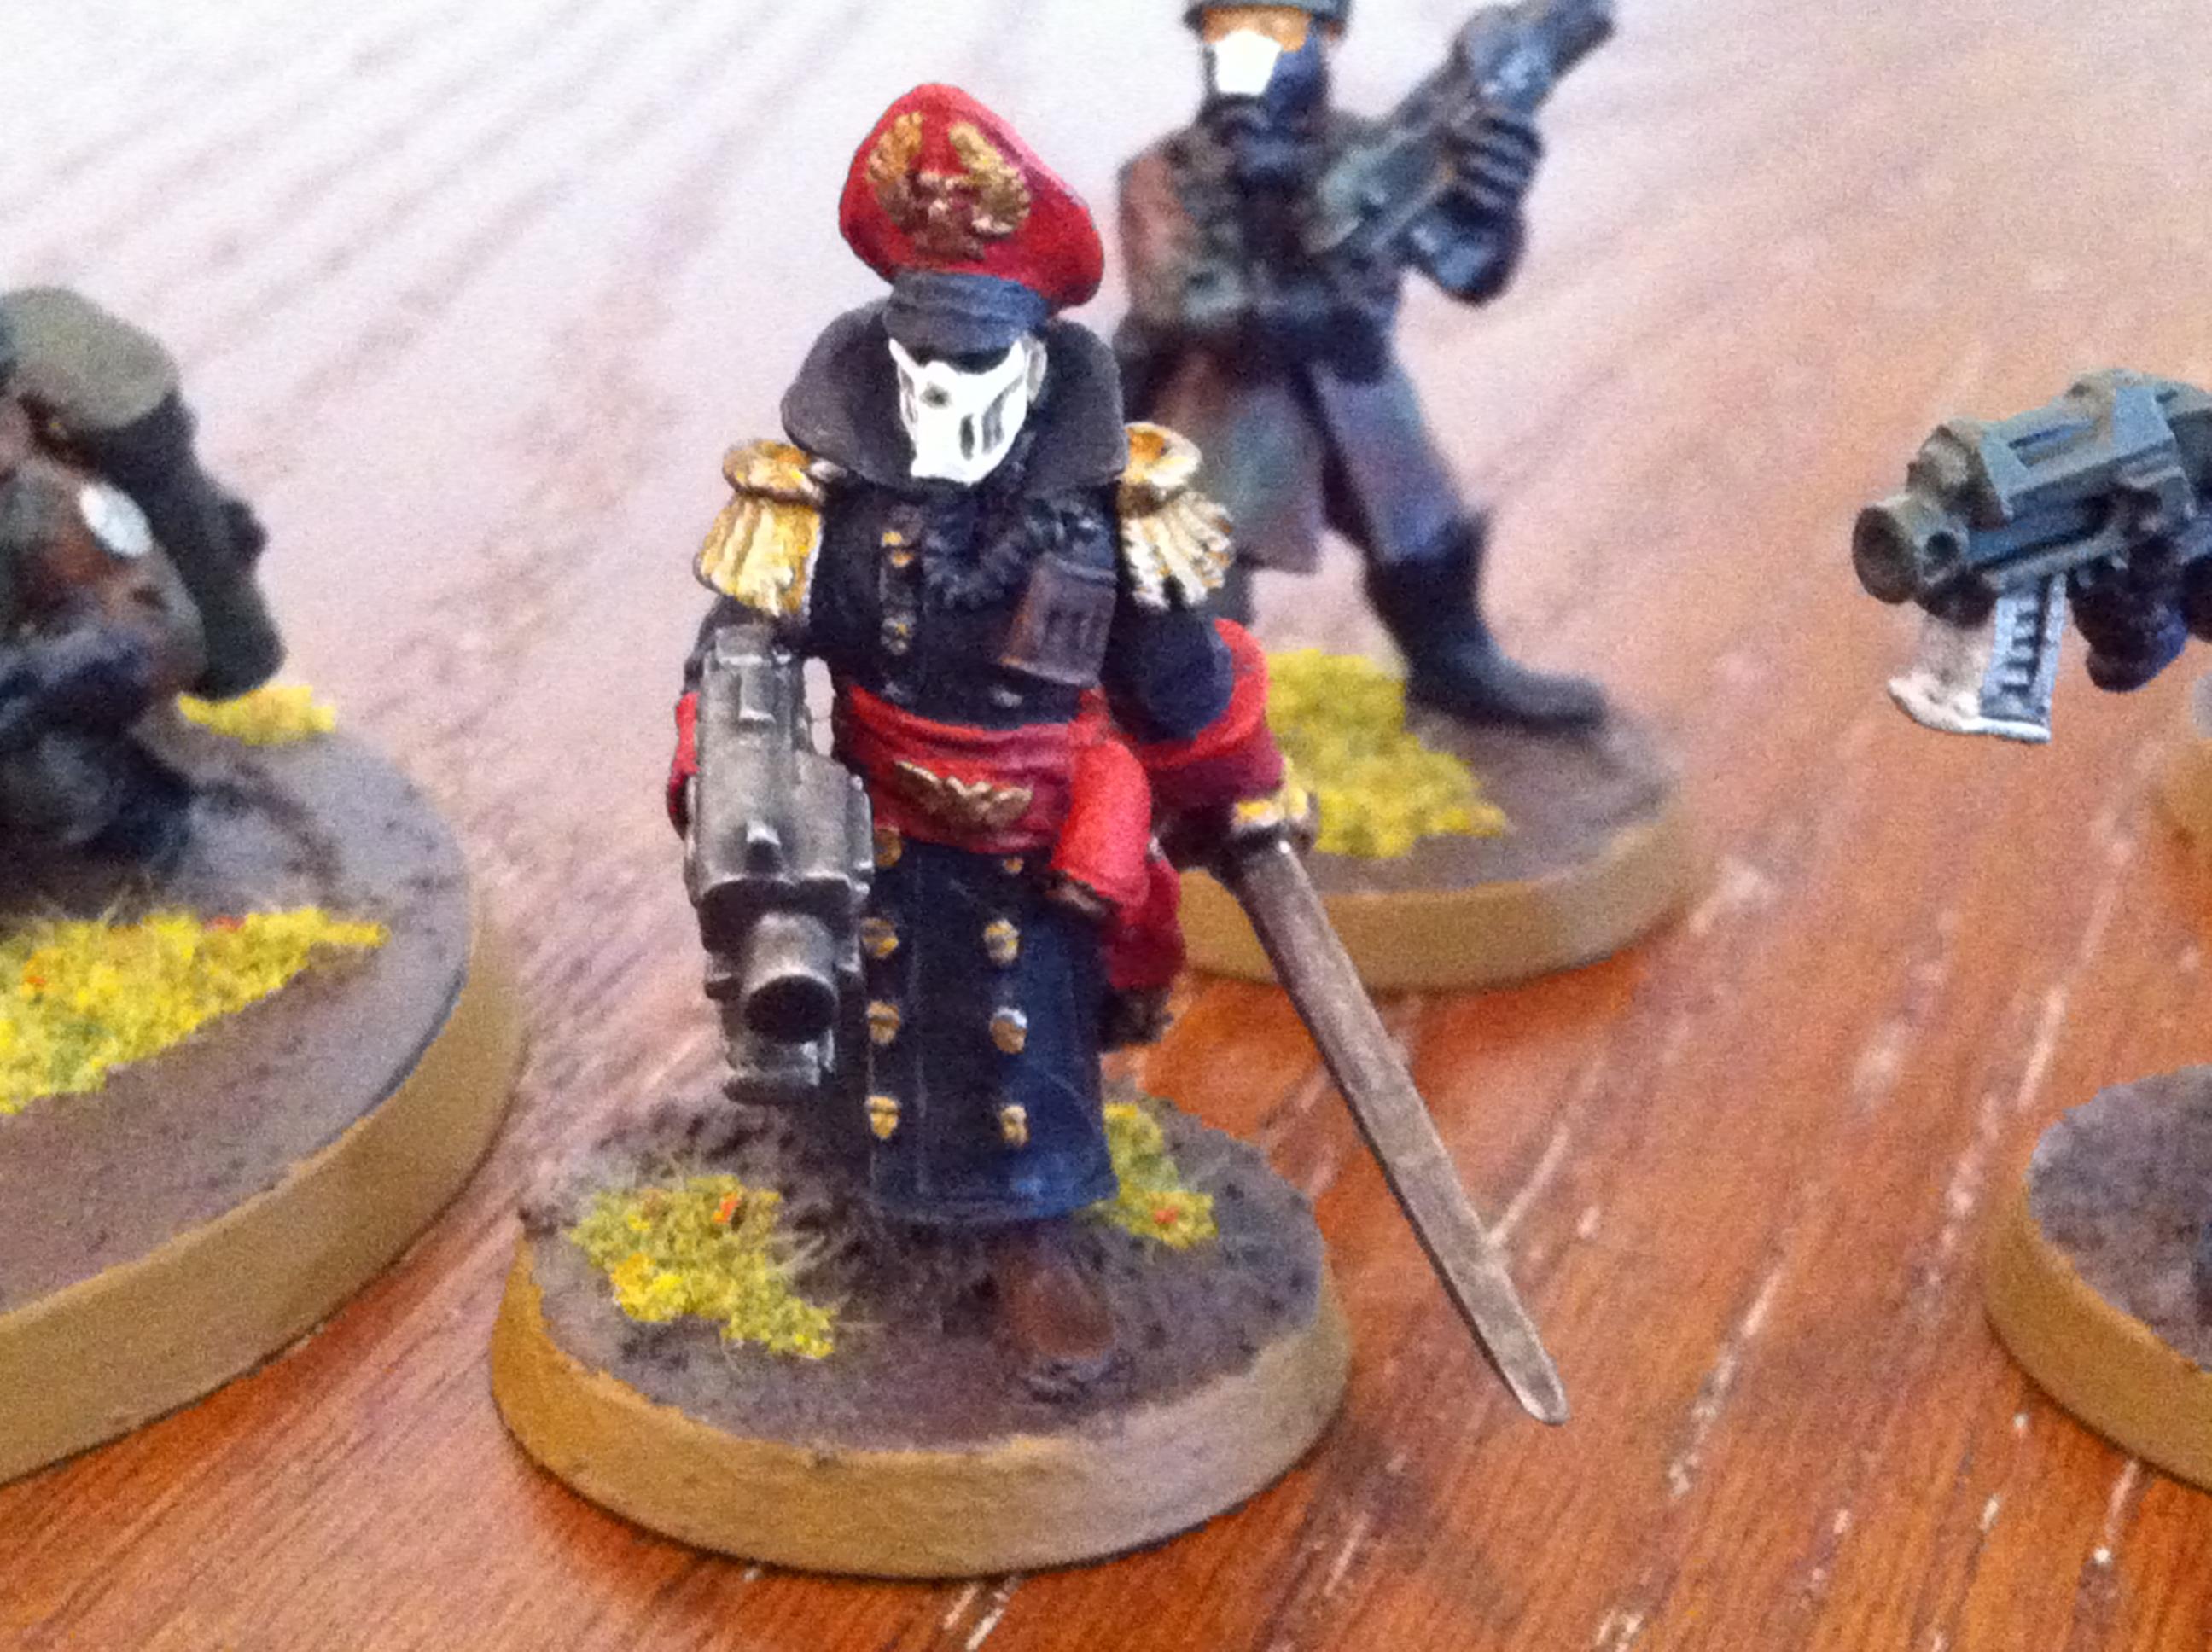 So glad I was able to pick up the old Steel legion commissar, someones got to keep the rank and file scum in line!